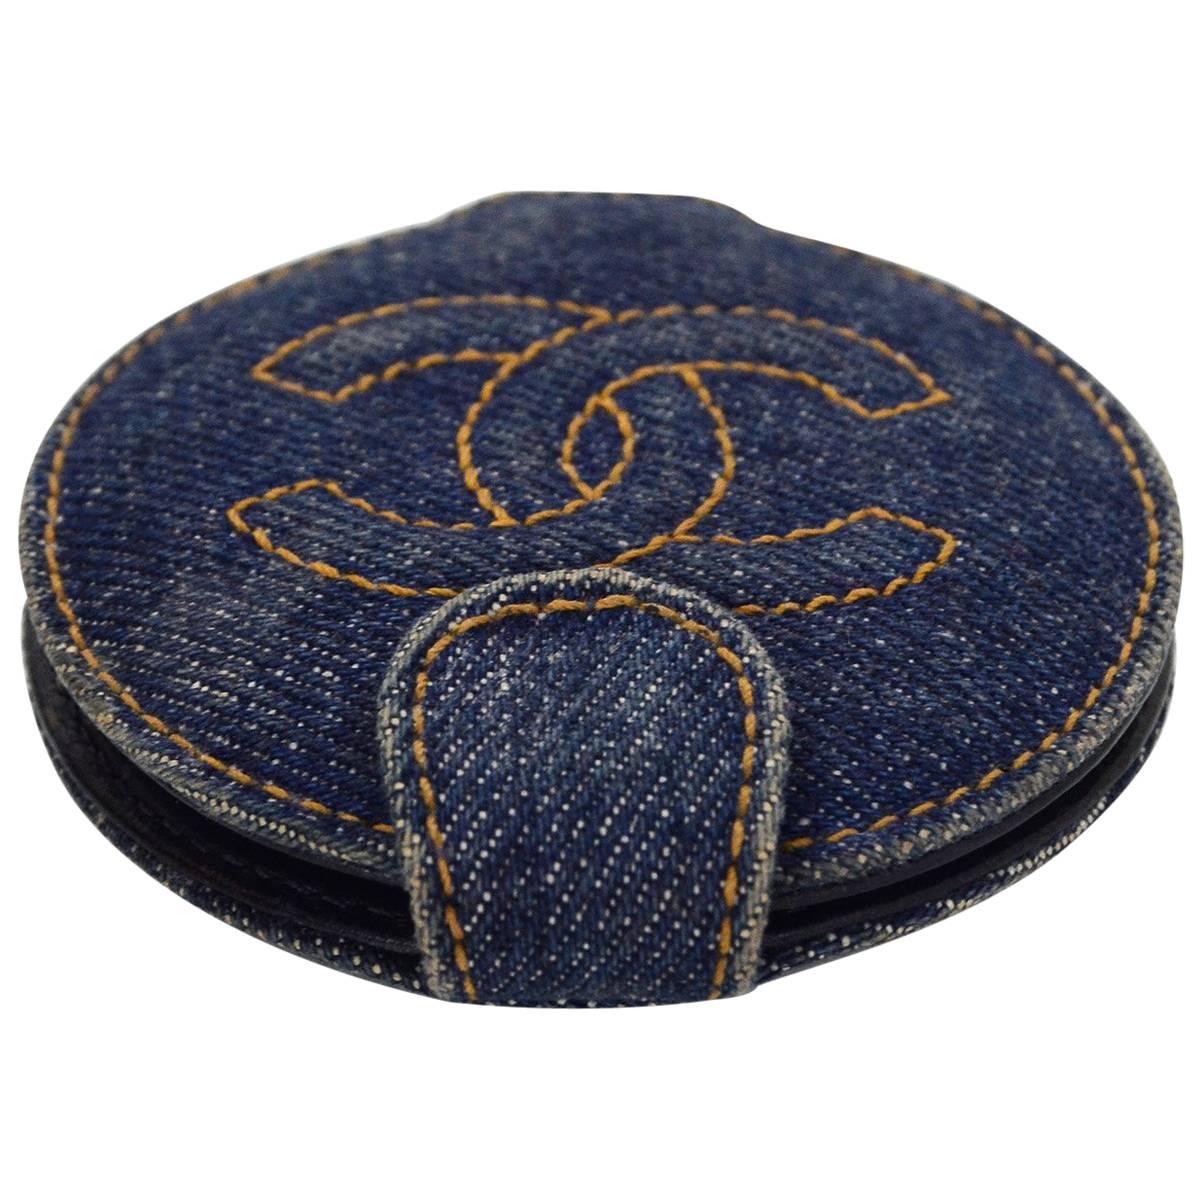 Chanel Denim CC Compact Mirror 

Made In: Italy
Color: Blue
Materials: Denim
Lining: Blue leather
Closure/Opening: Snap closure
Overall Condition: Very good
Exterior Condition: Very good pre-owned condition with the exception of light wear and